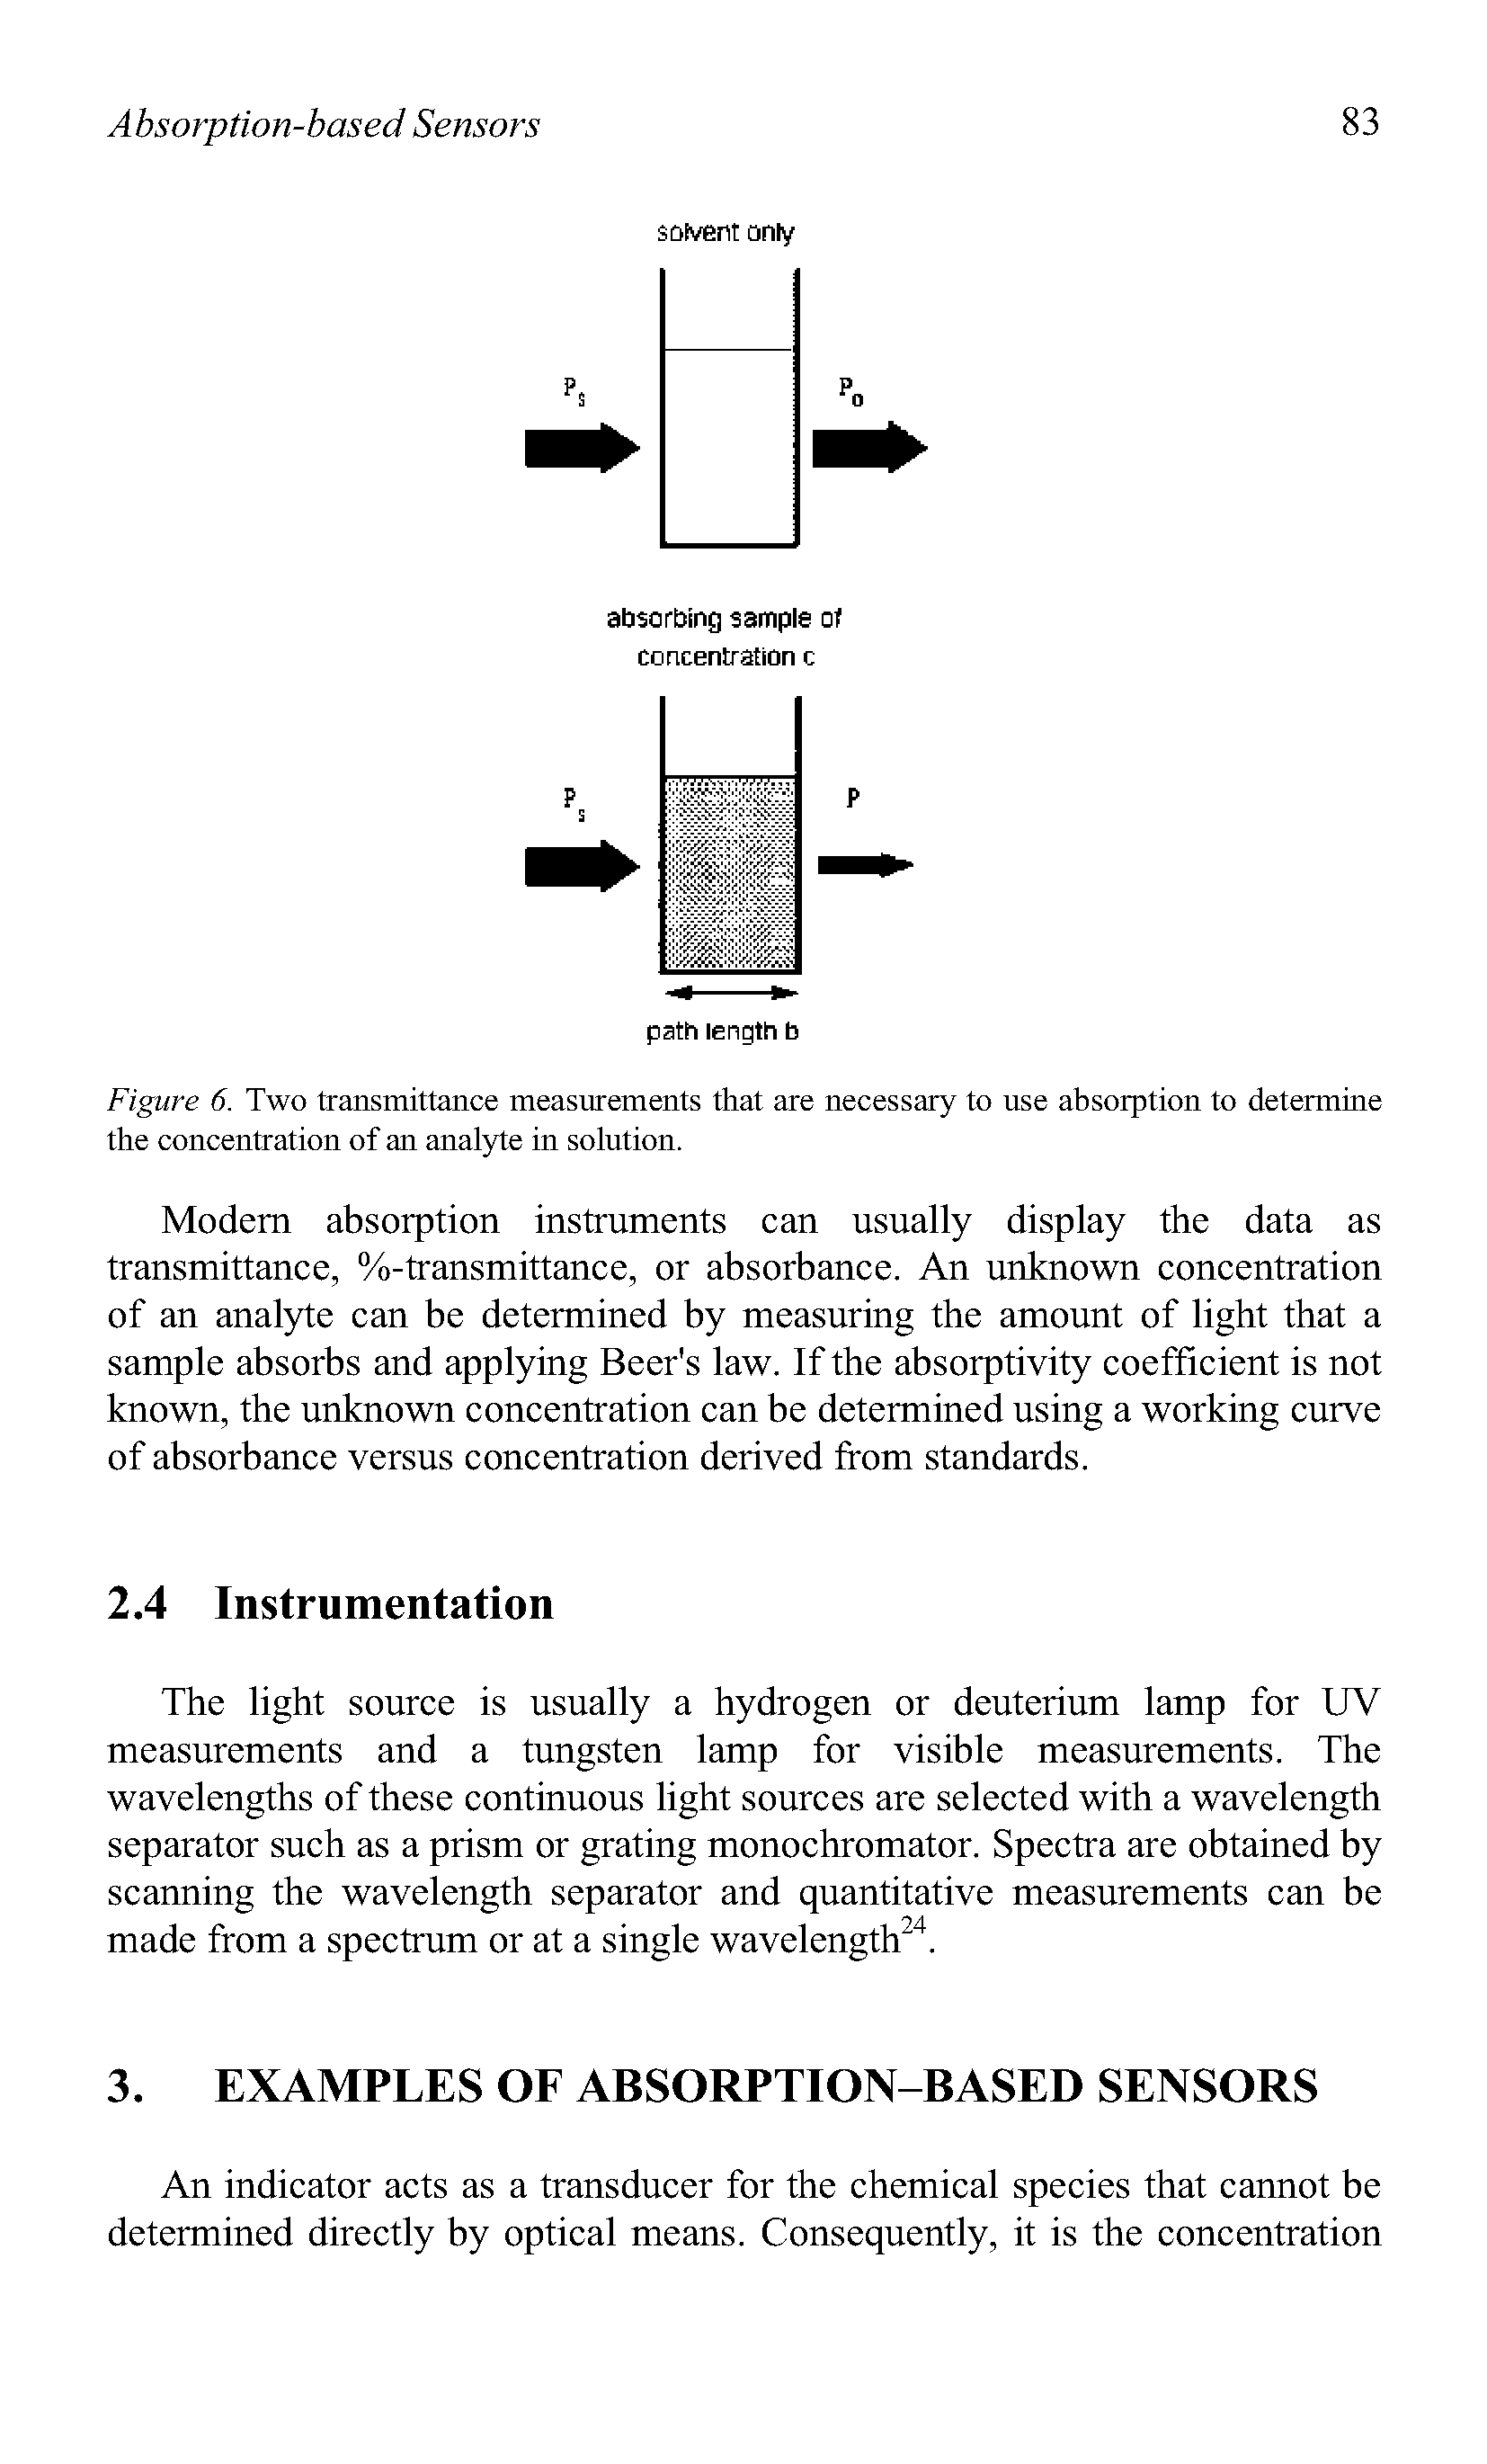 Figure 6. Two transmittance measurements that are necessary to use absorption to determine the concentration of an analyte in solution.